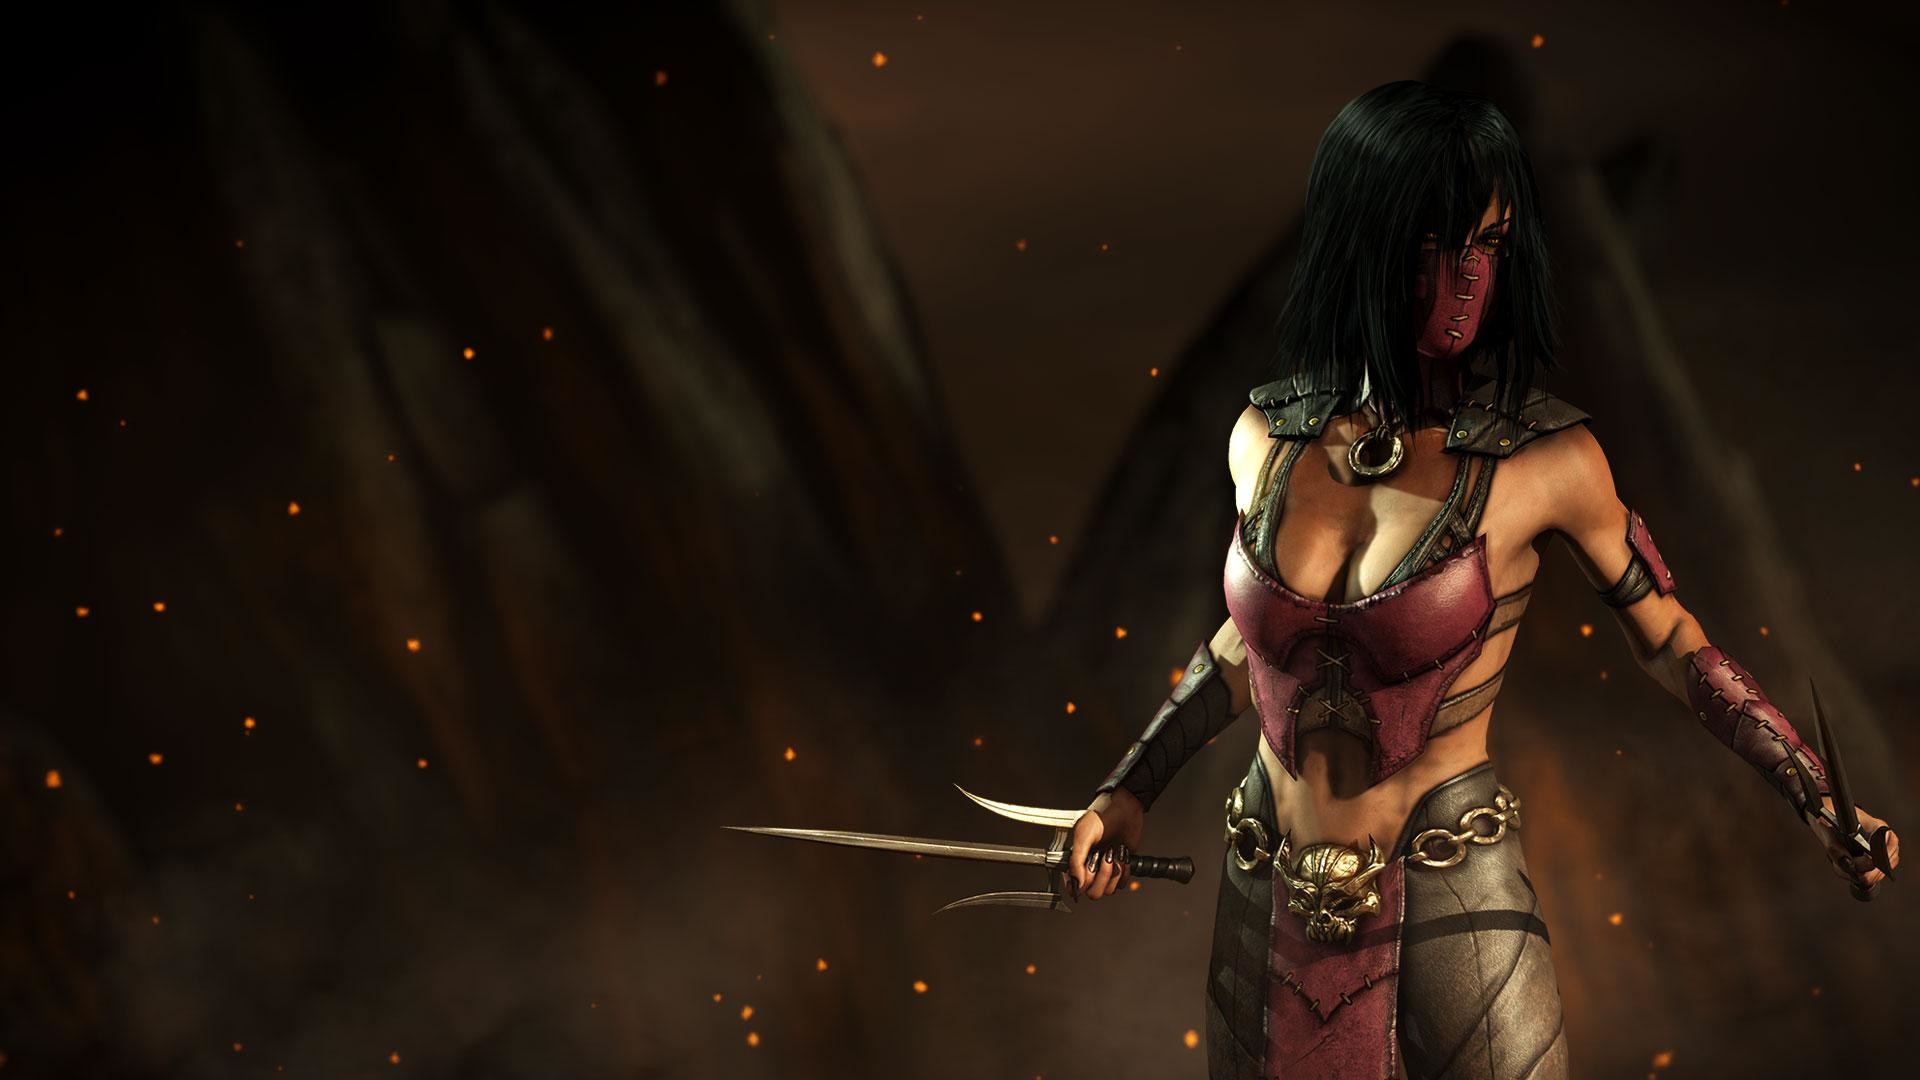 1920x1080 New Mortal Kombat X Images Confirm Mileena and Johnny Cage